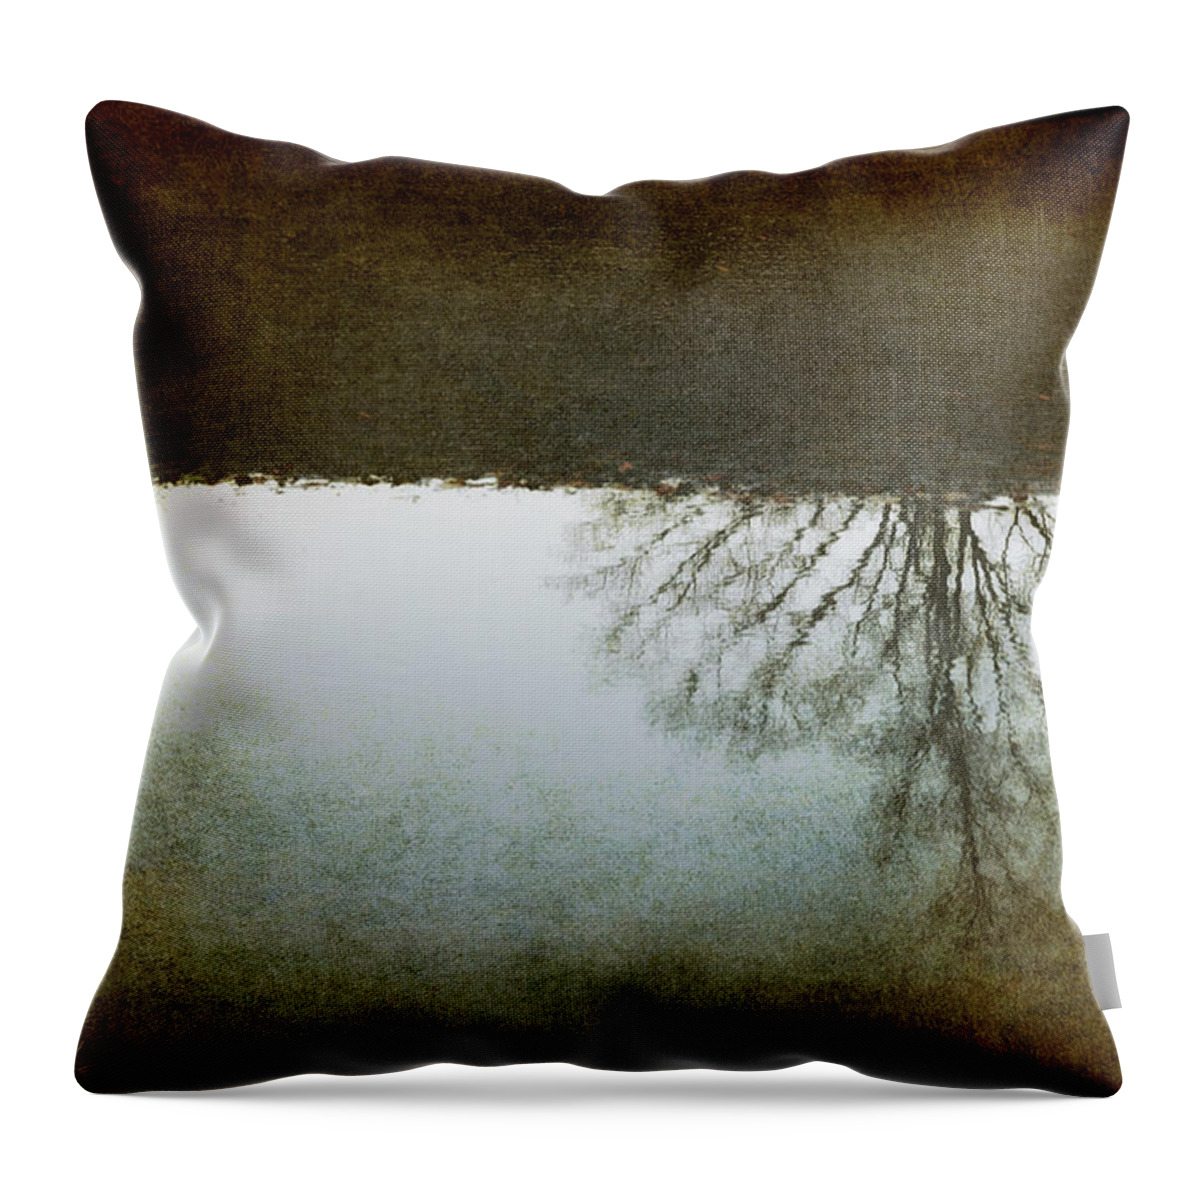 Autumn Throw Pillow featuring the photograph Illusions Of Autumn by Janet Lee